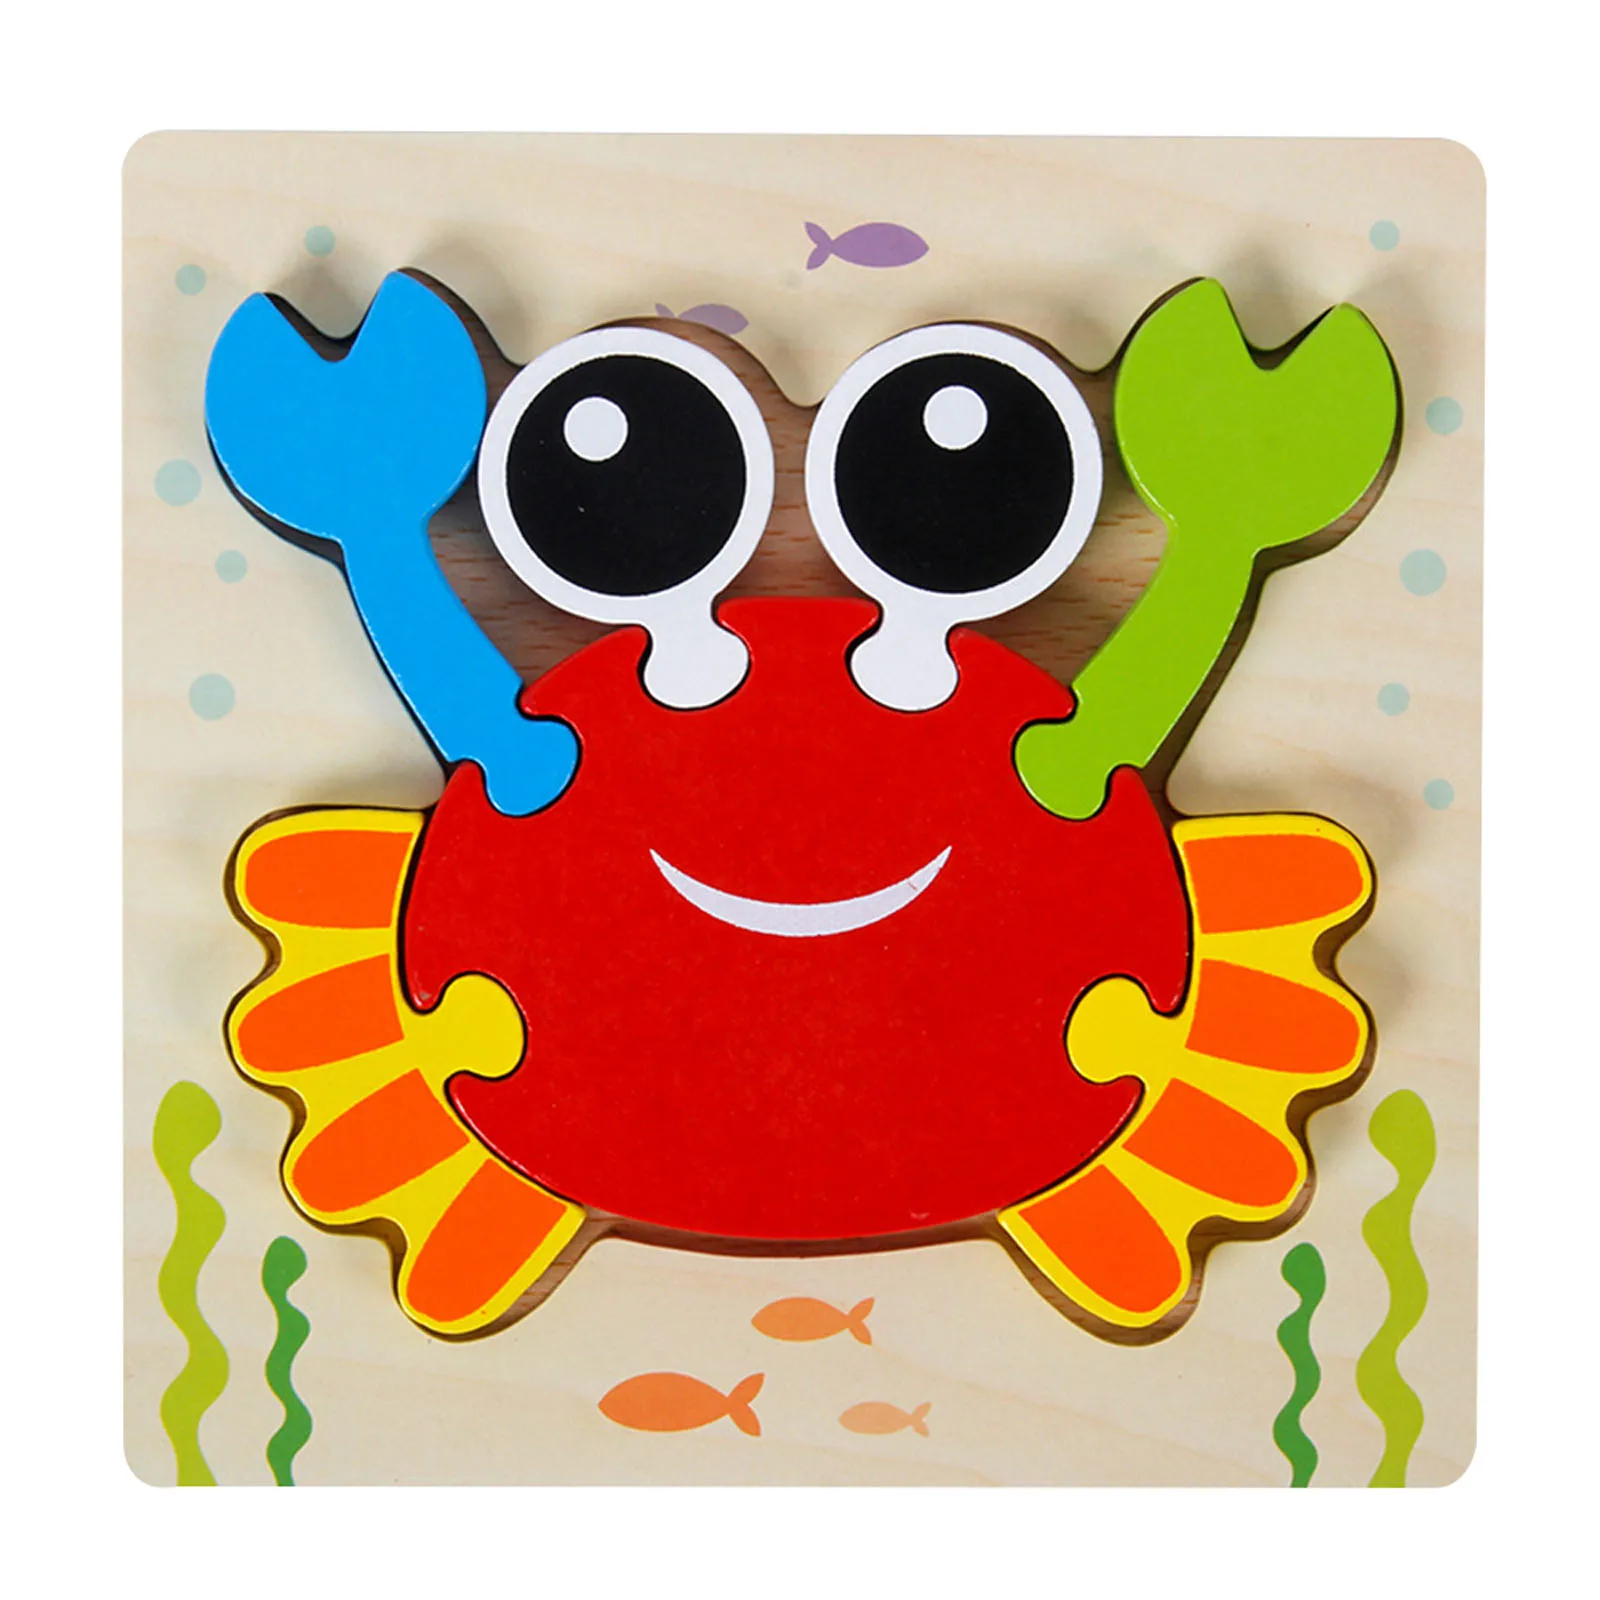 

Wooden Puzzles Colorful Cartoon Jigsaw For Hand-Eye Coordination Development Kids Children Early Education